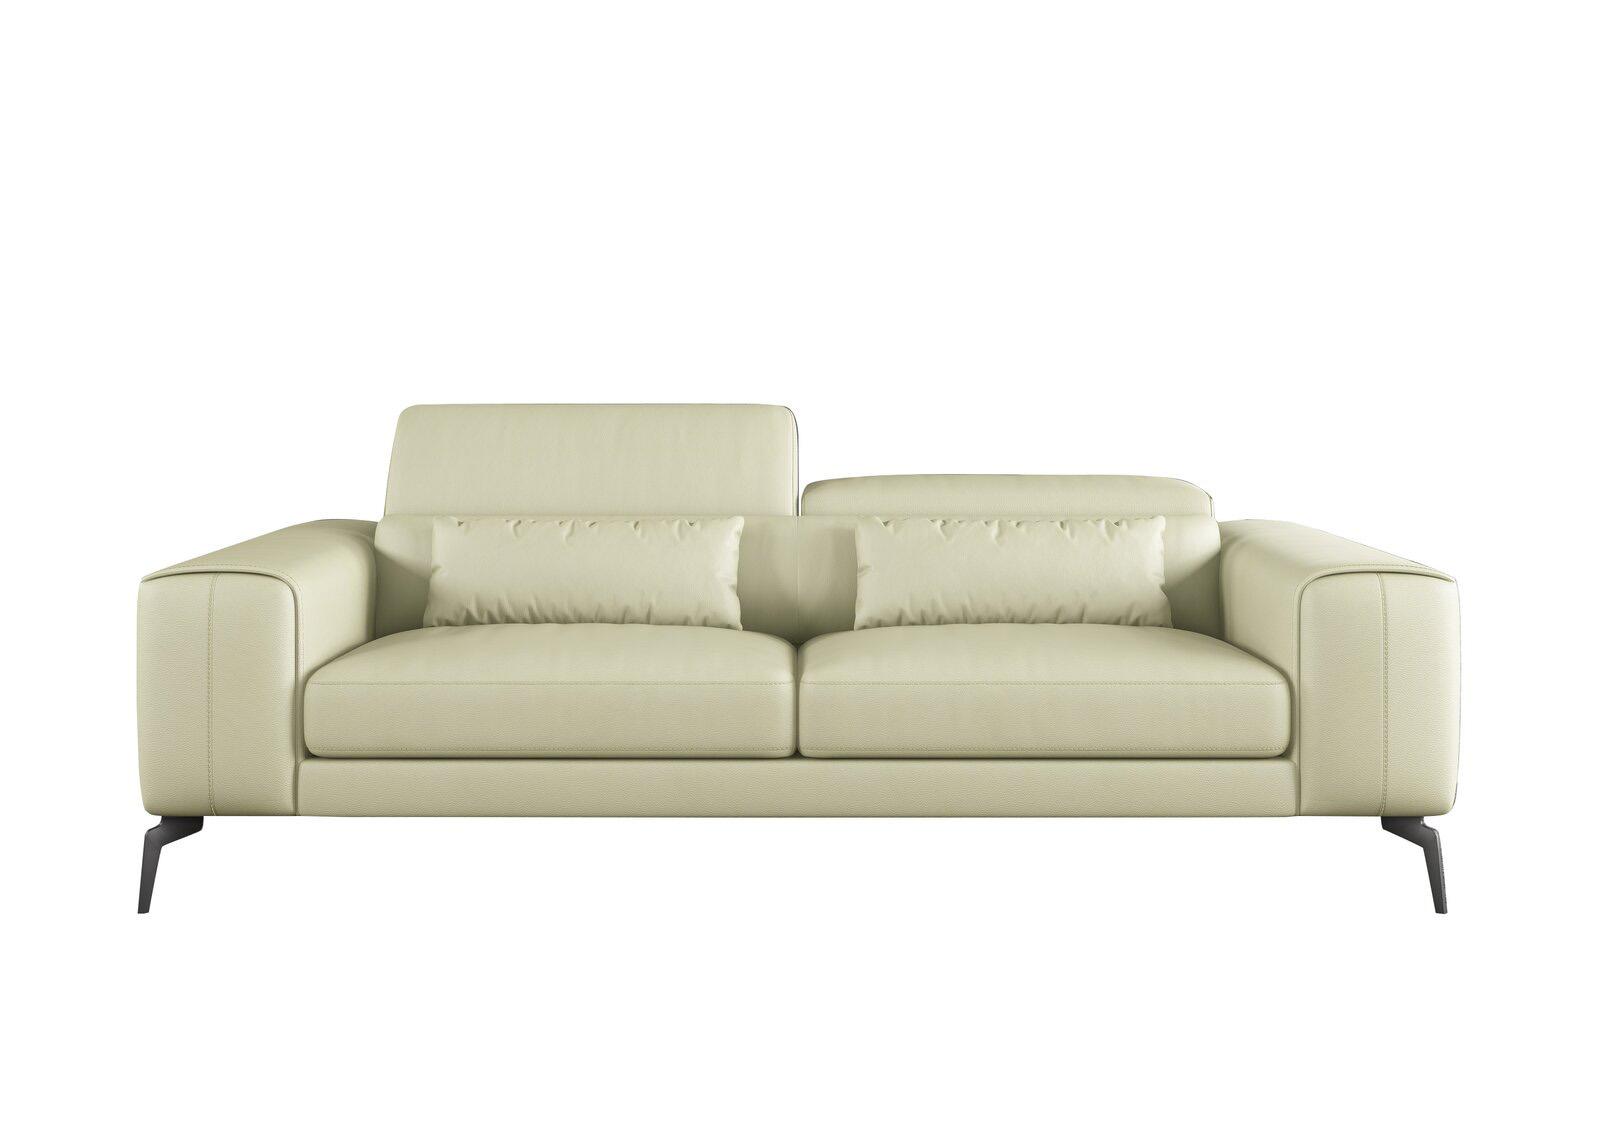 Contemporary, Modern Sofa CAVOUR EF-12552-S in Off-White Leather